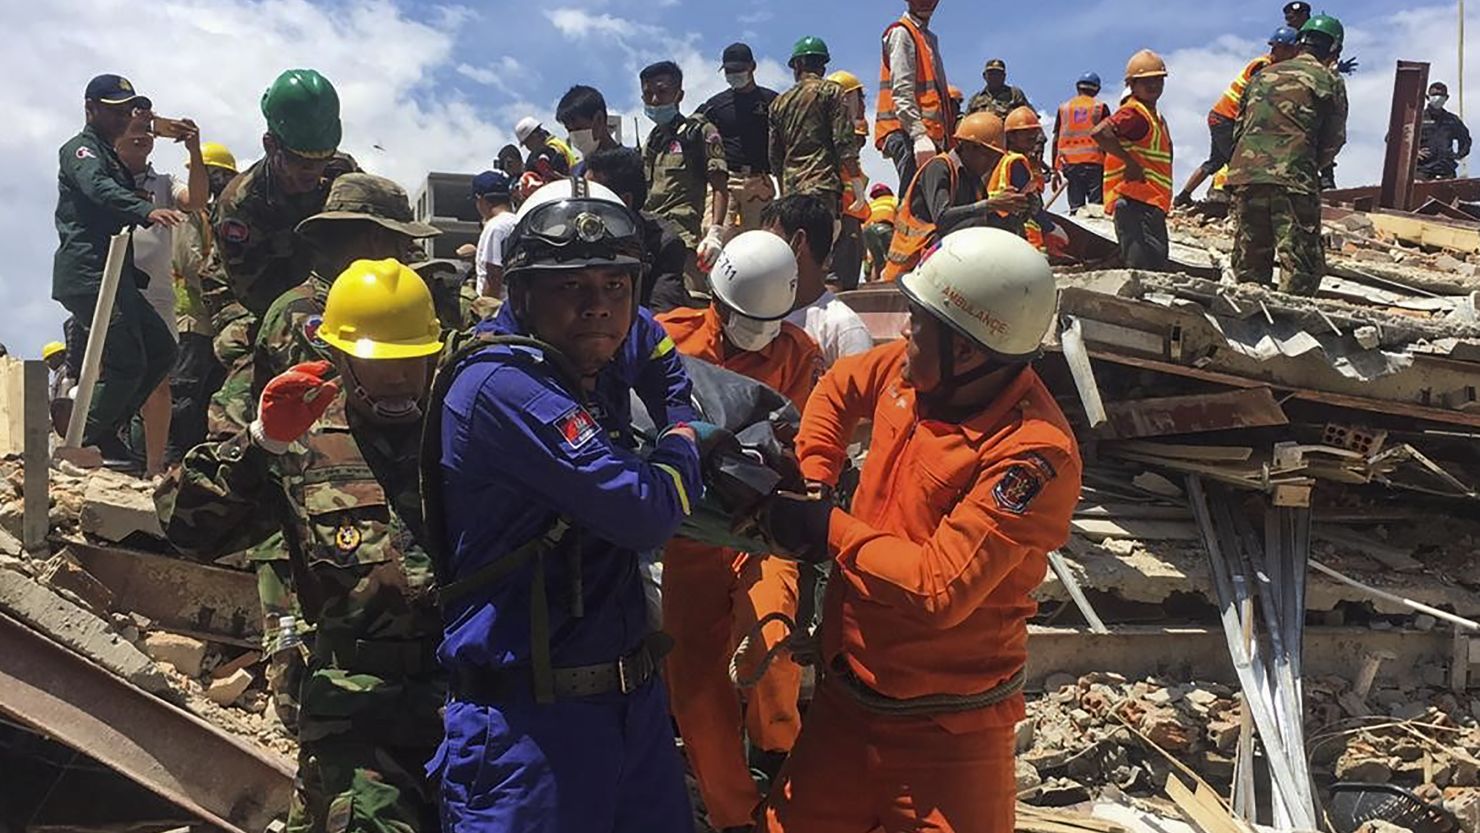 Three people died when the building collapsed in Cambodia. 